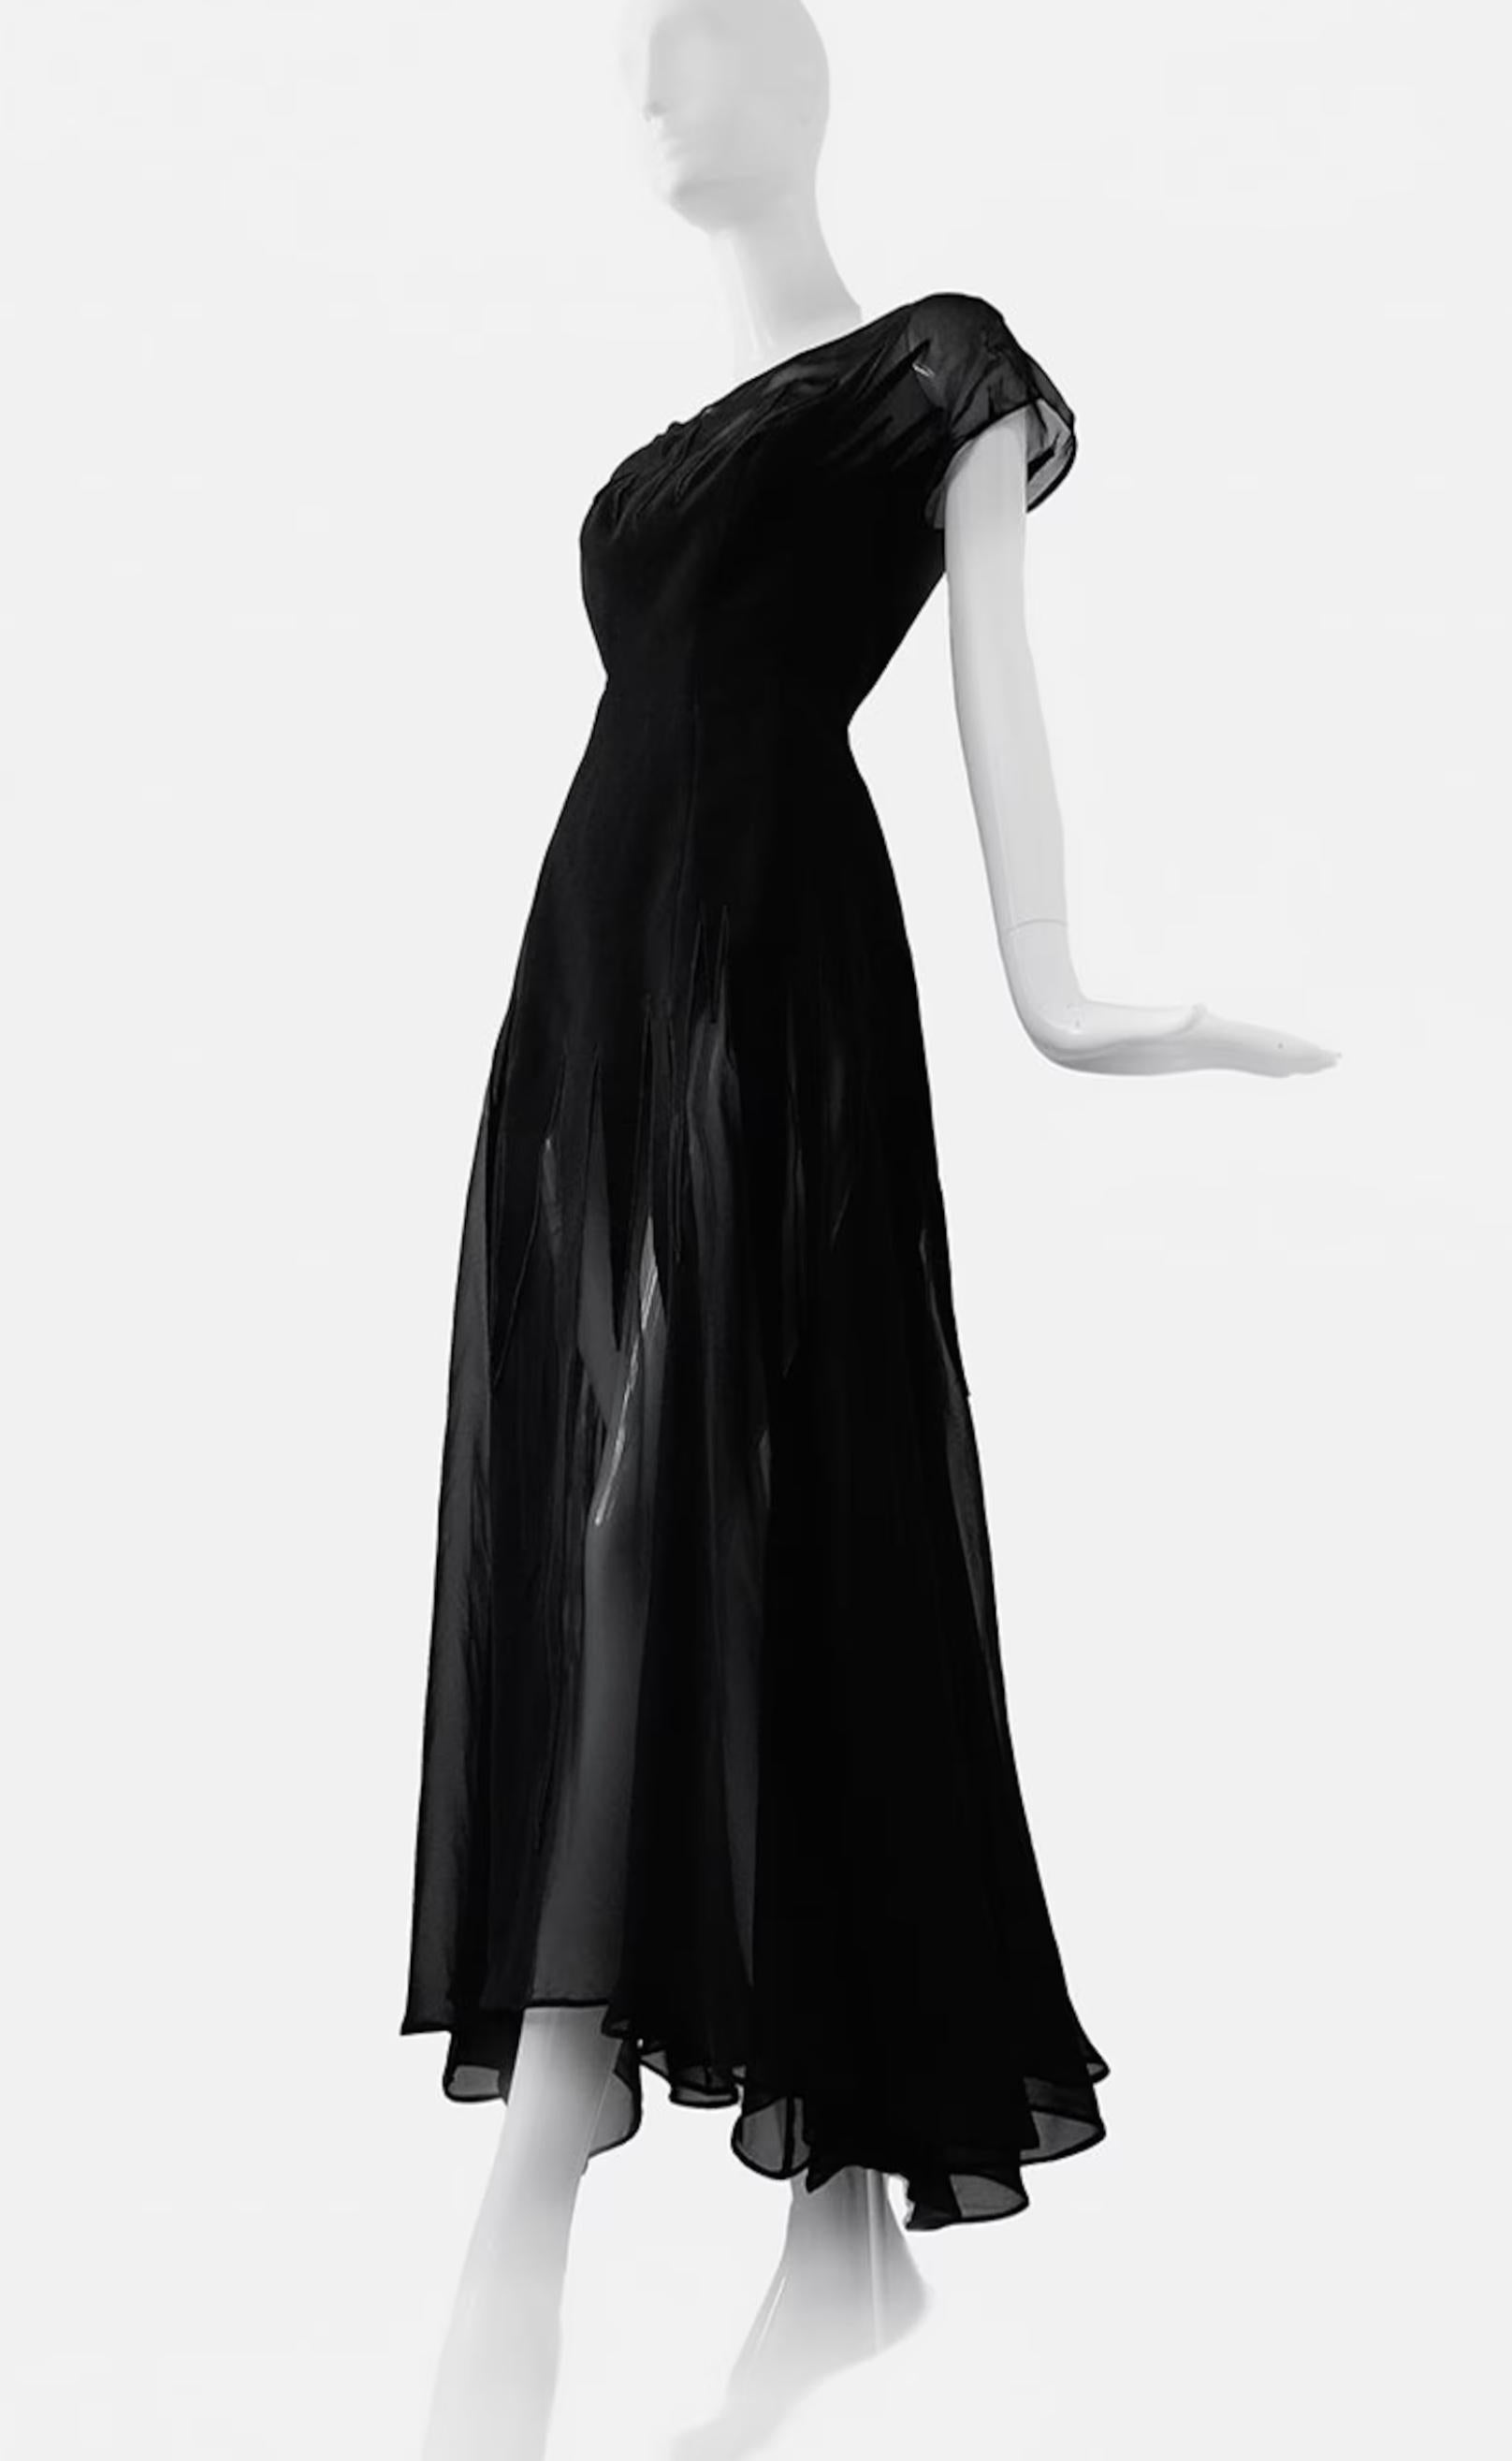 Devine Thierry Mugler Runway Dress Goddess Black Semi Sheer Evening Gown  In Good Condition For Sale In Berlin, BE